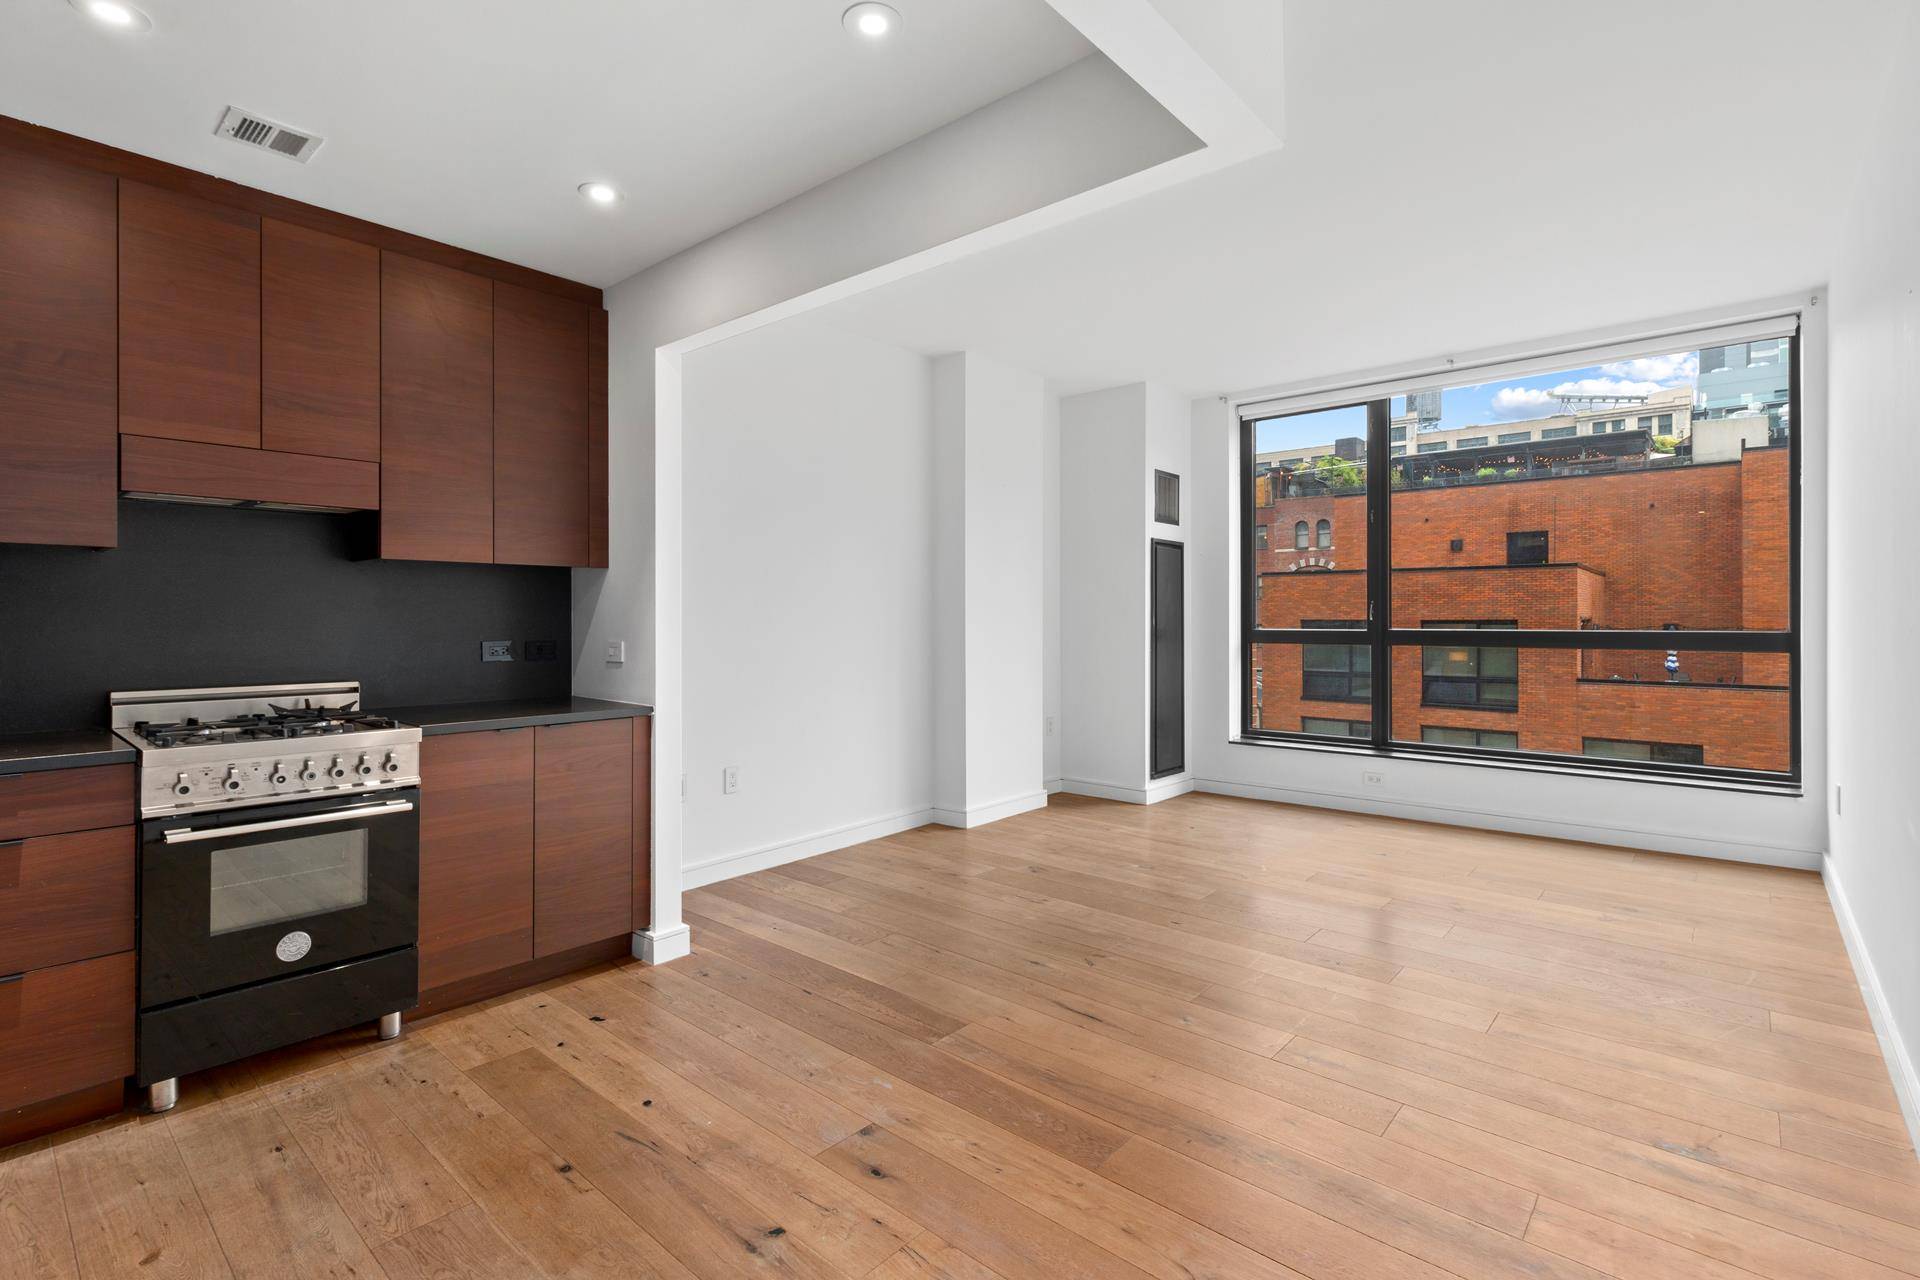 Wonderful, bright, North facing studio at Art Condominium, literally steps from the High Line, Chelsea Piers, the emerging Hudson Yards, in the midst of the vibrant West Chelsea gallery scene.